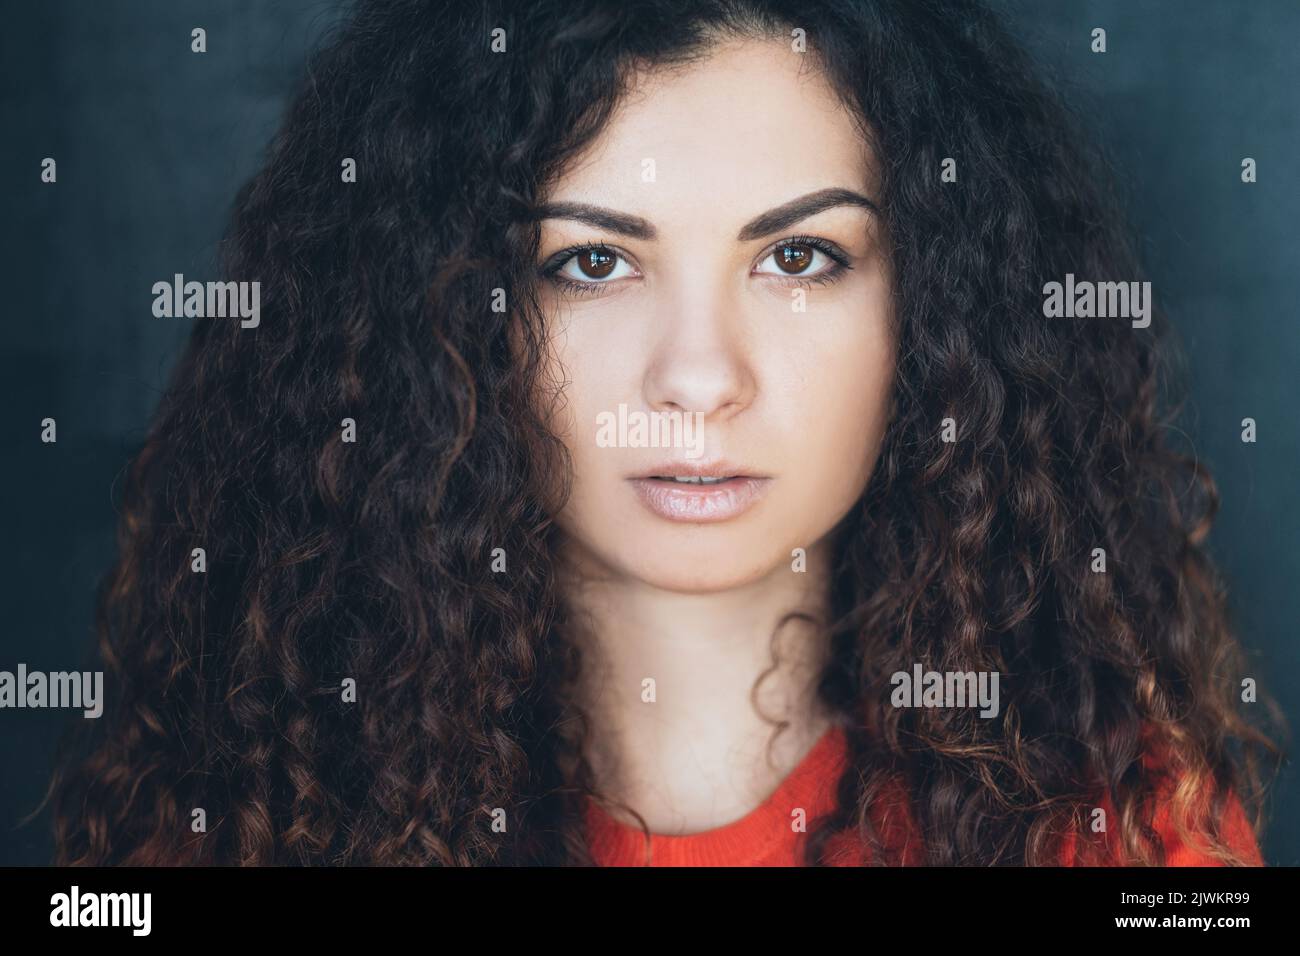 young woman curly hair fixed gaze concentration Stock Photo